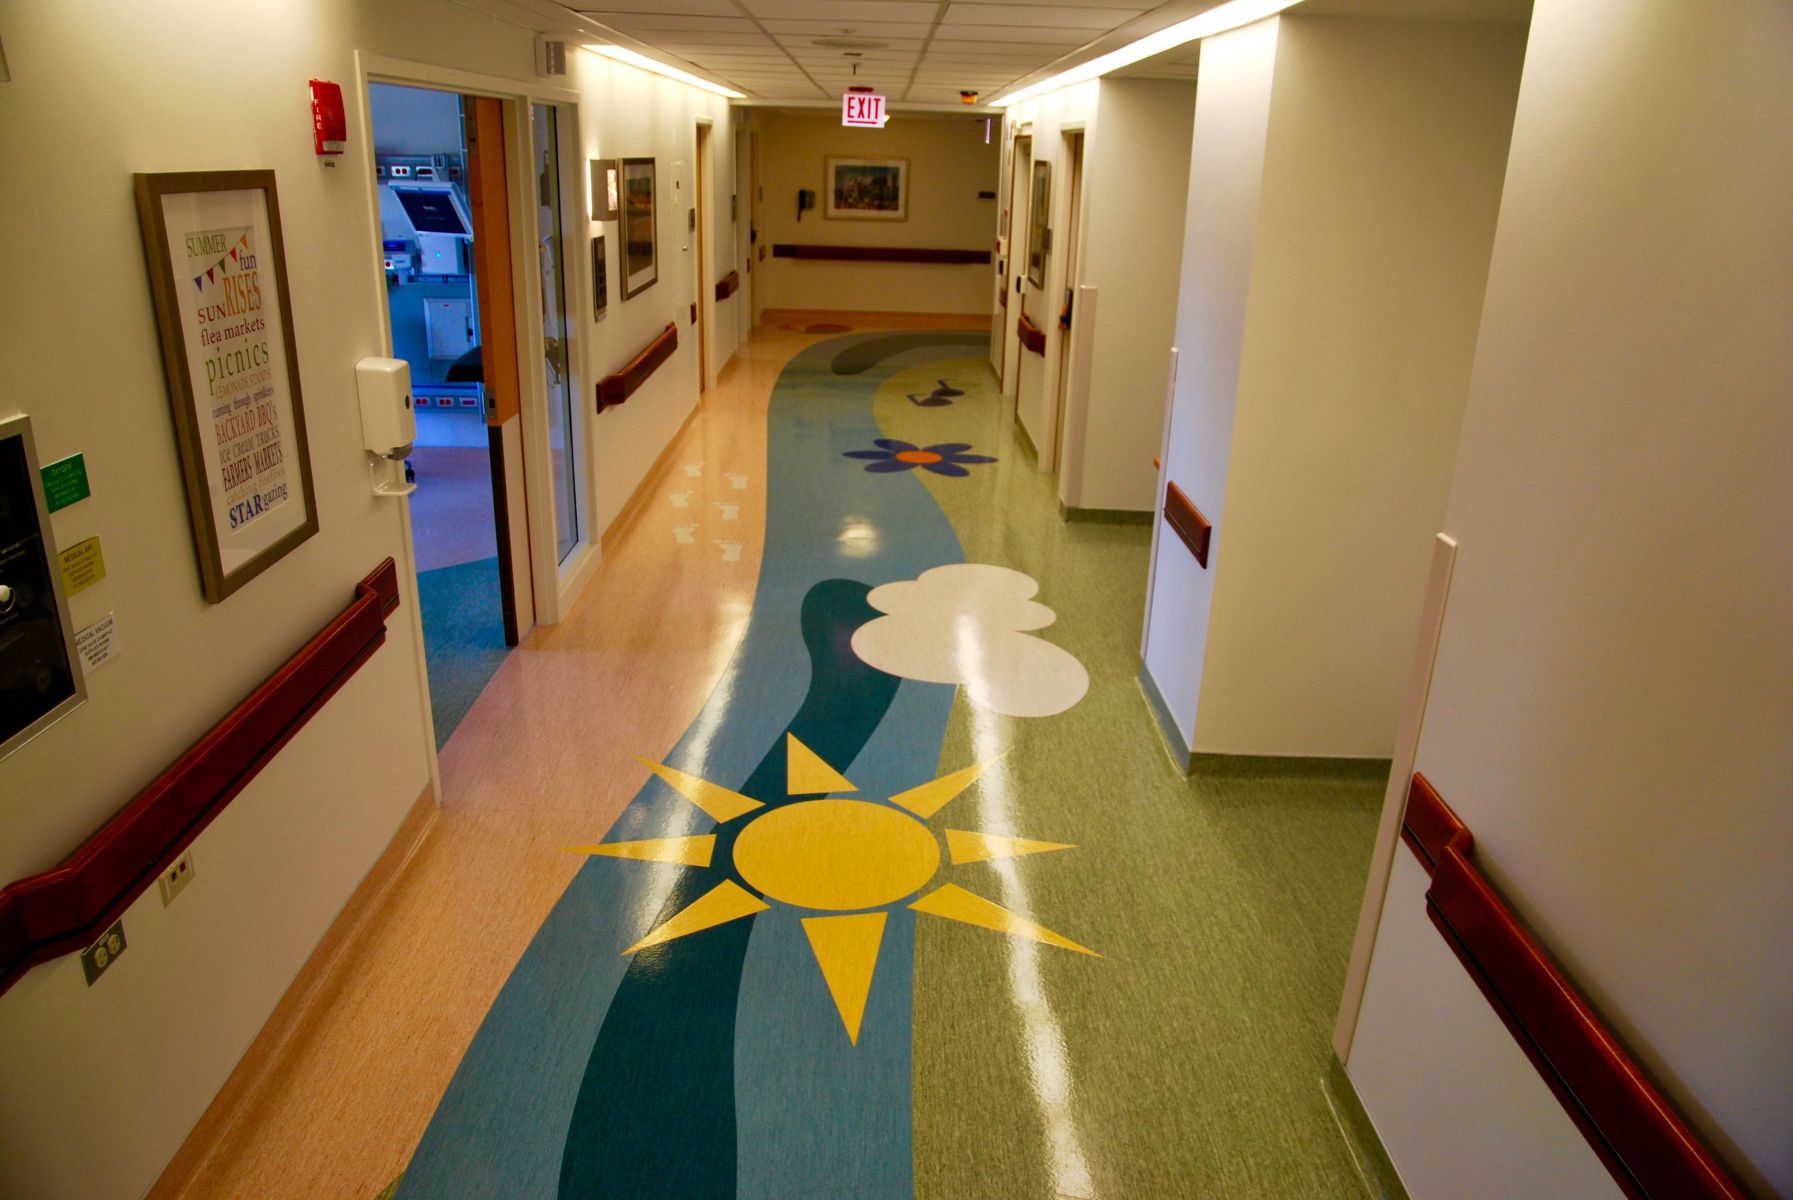 Rush University Medical Center Pediatric Intensive Care Unit floors with playful shapes resembling different seasons